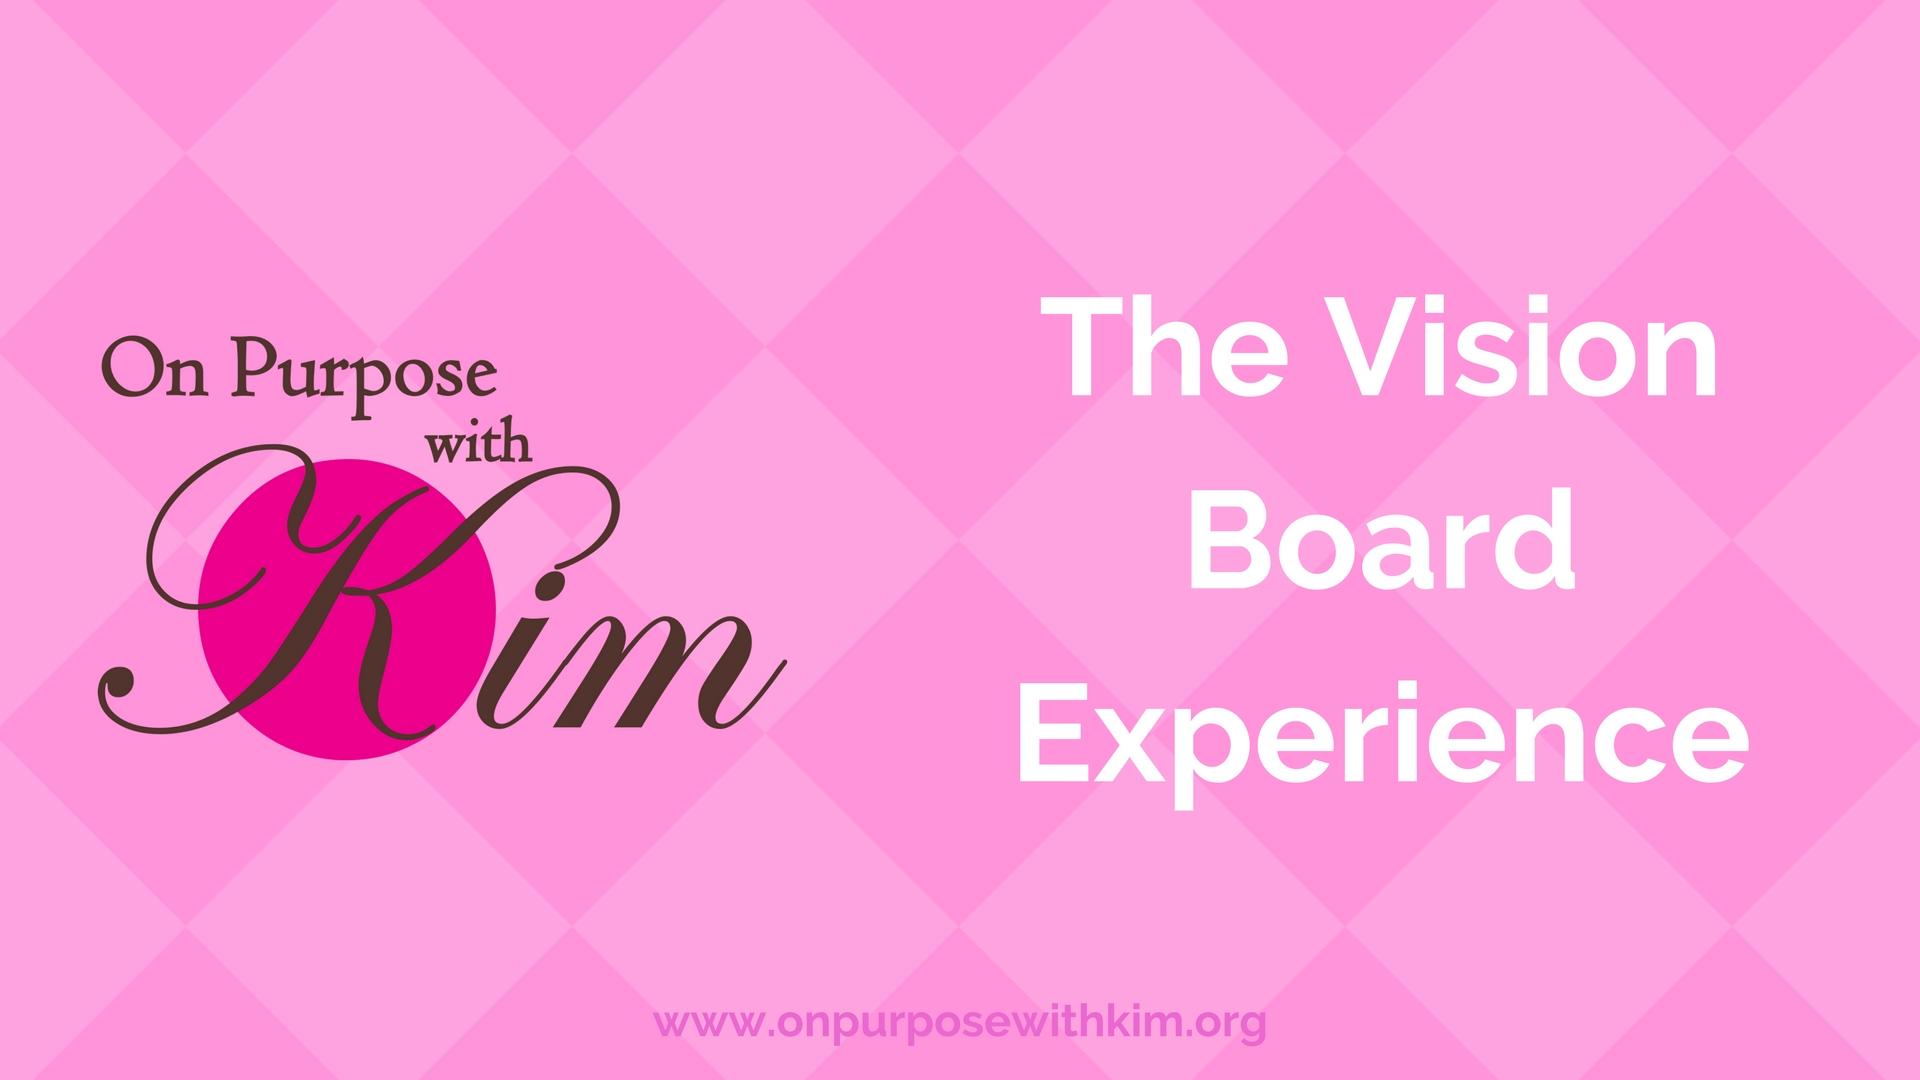 The Vision Board Experience